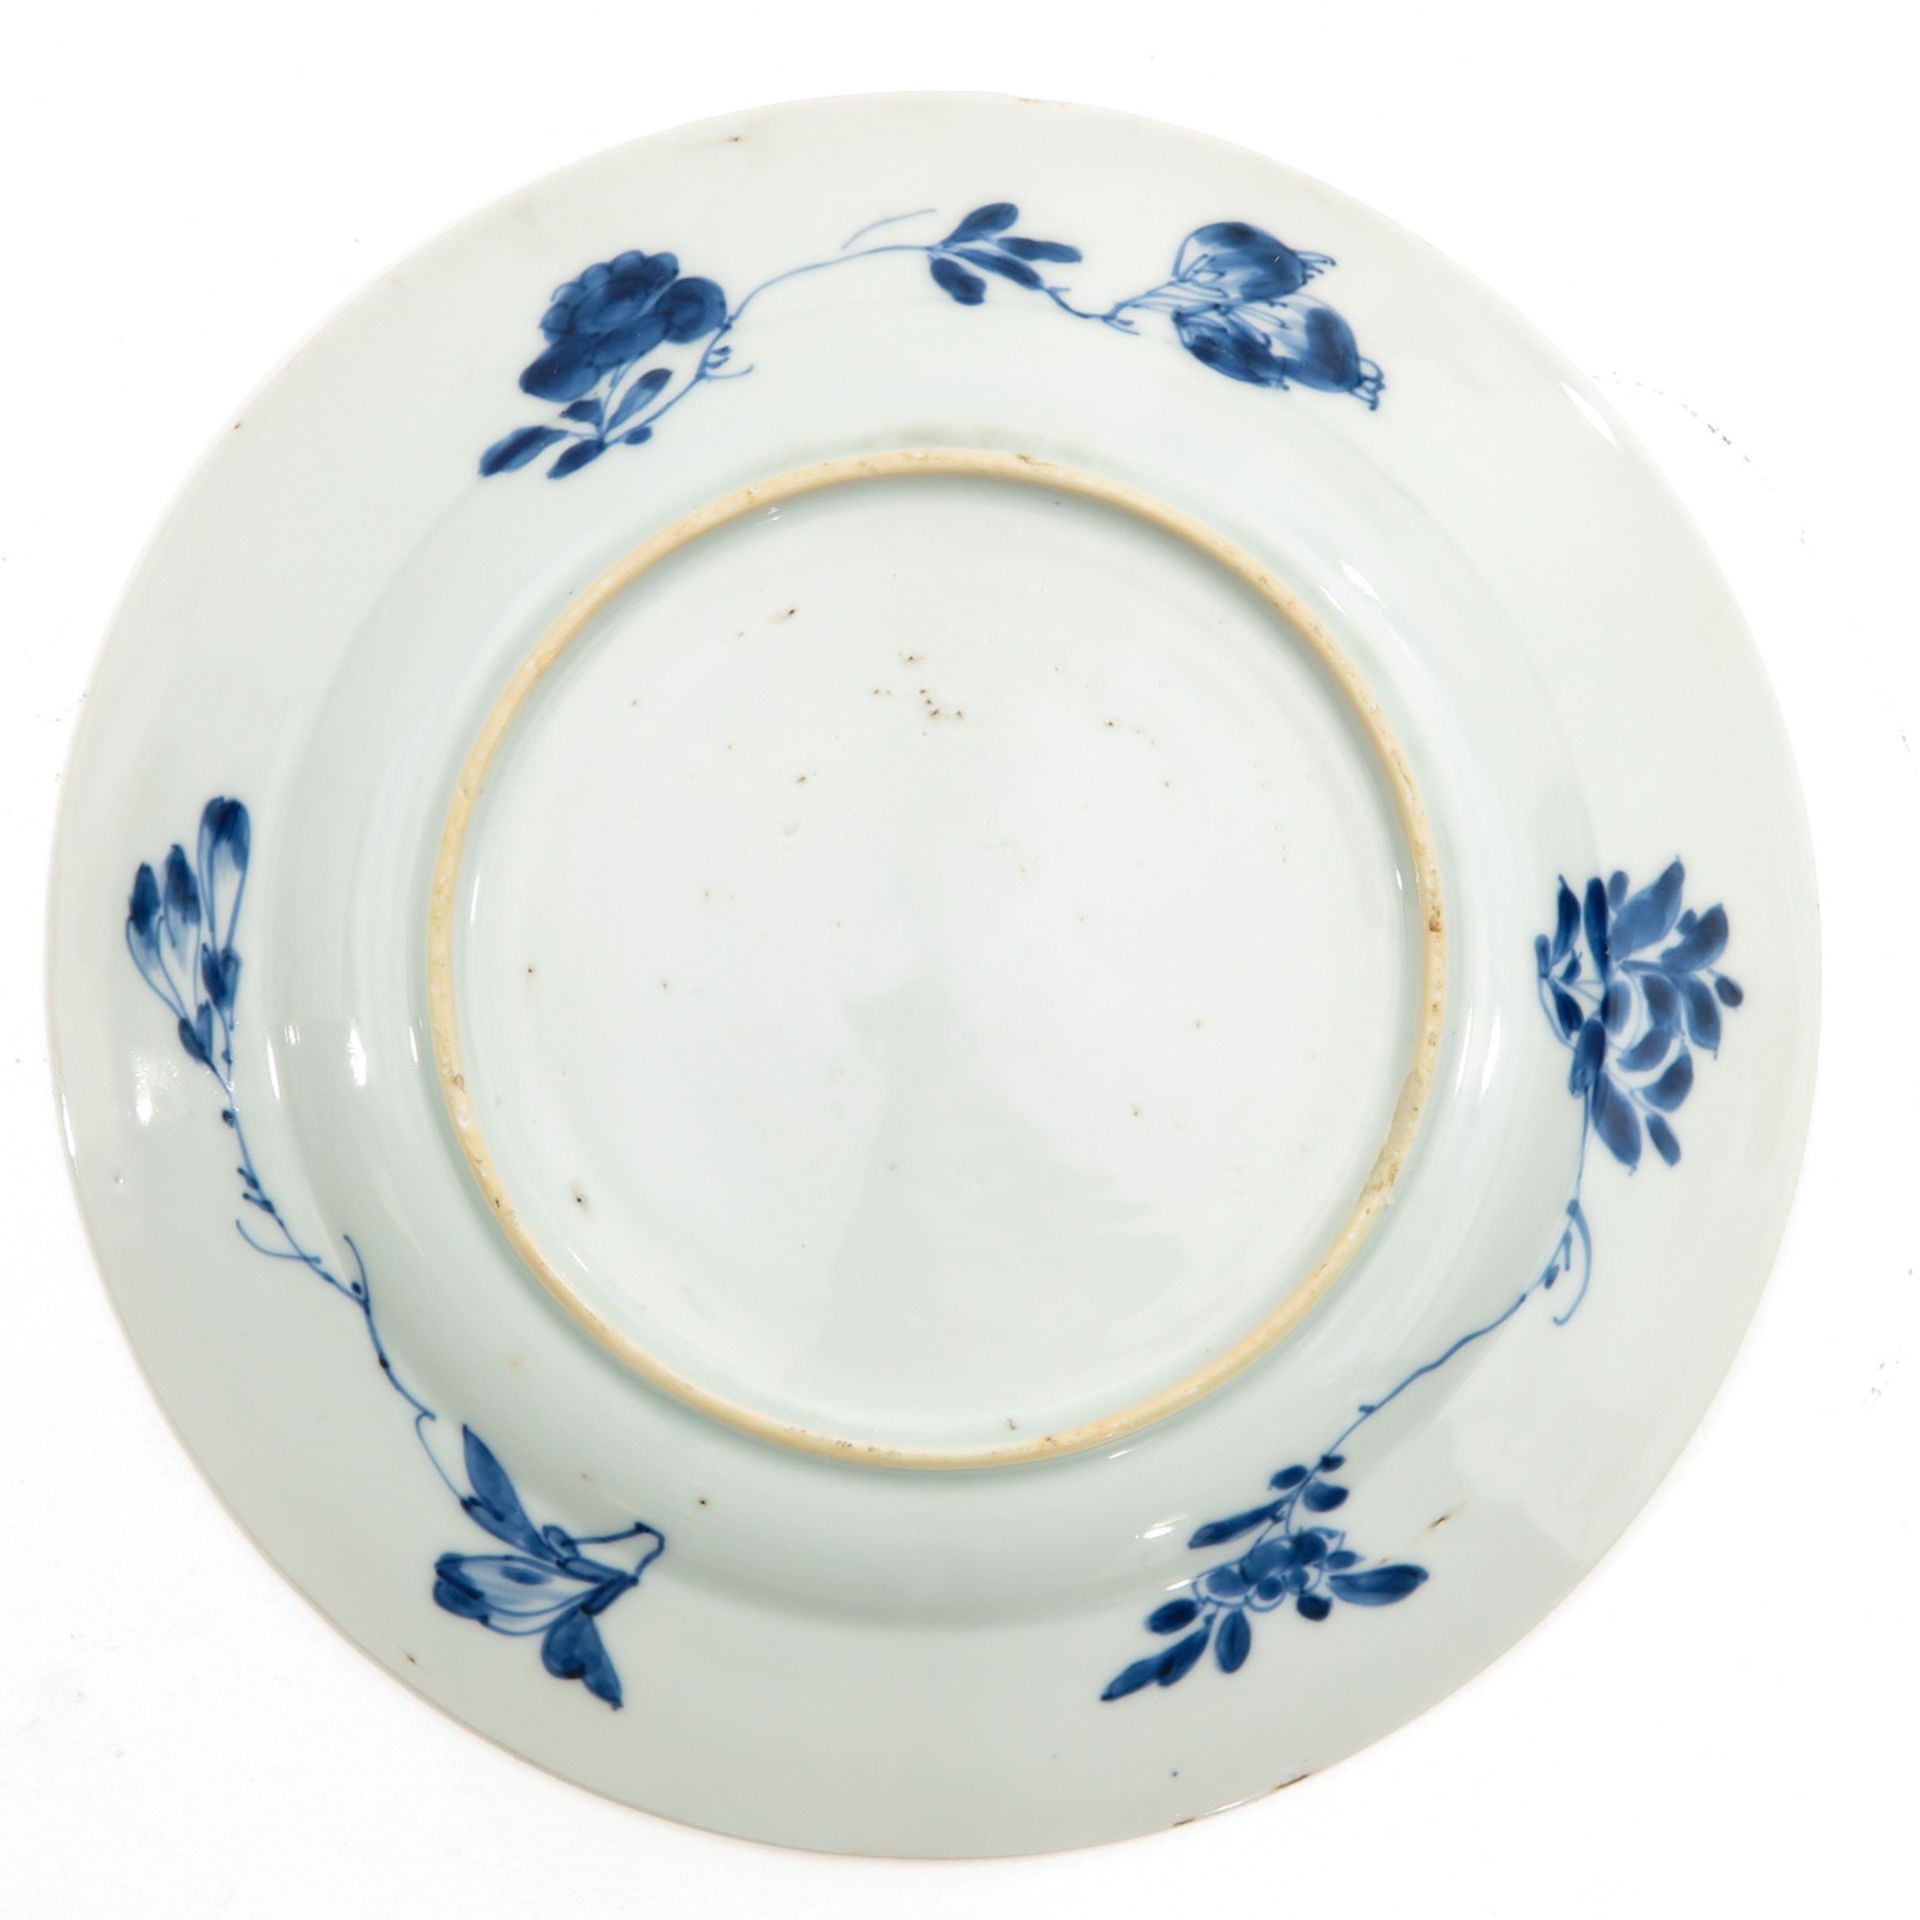 A Series of 3 Blue and White Plates - Image 8 of 10